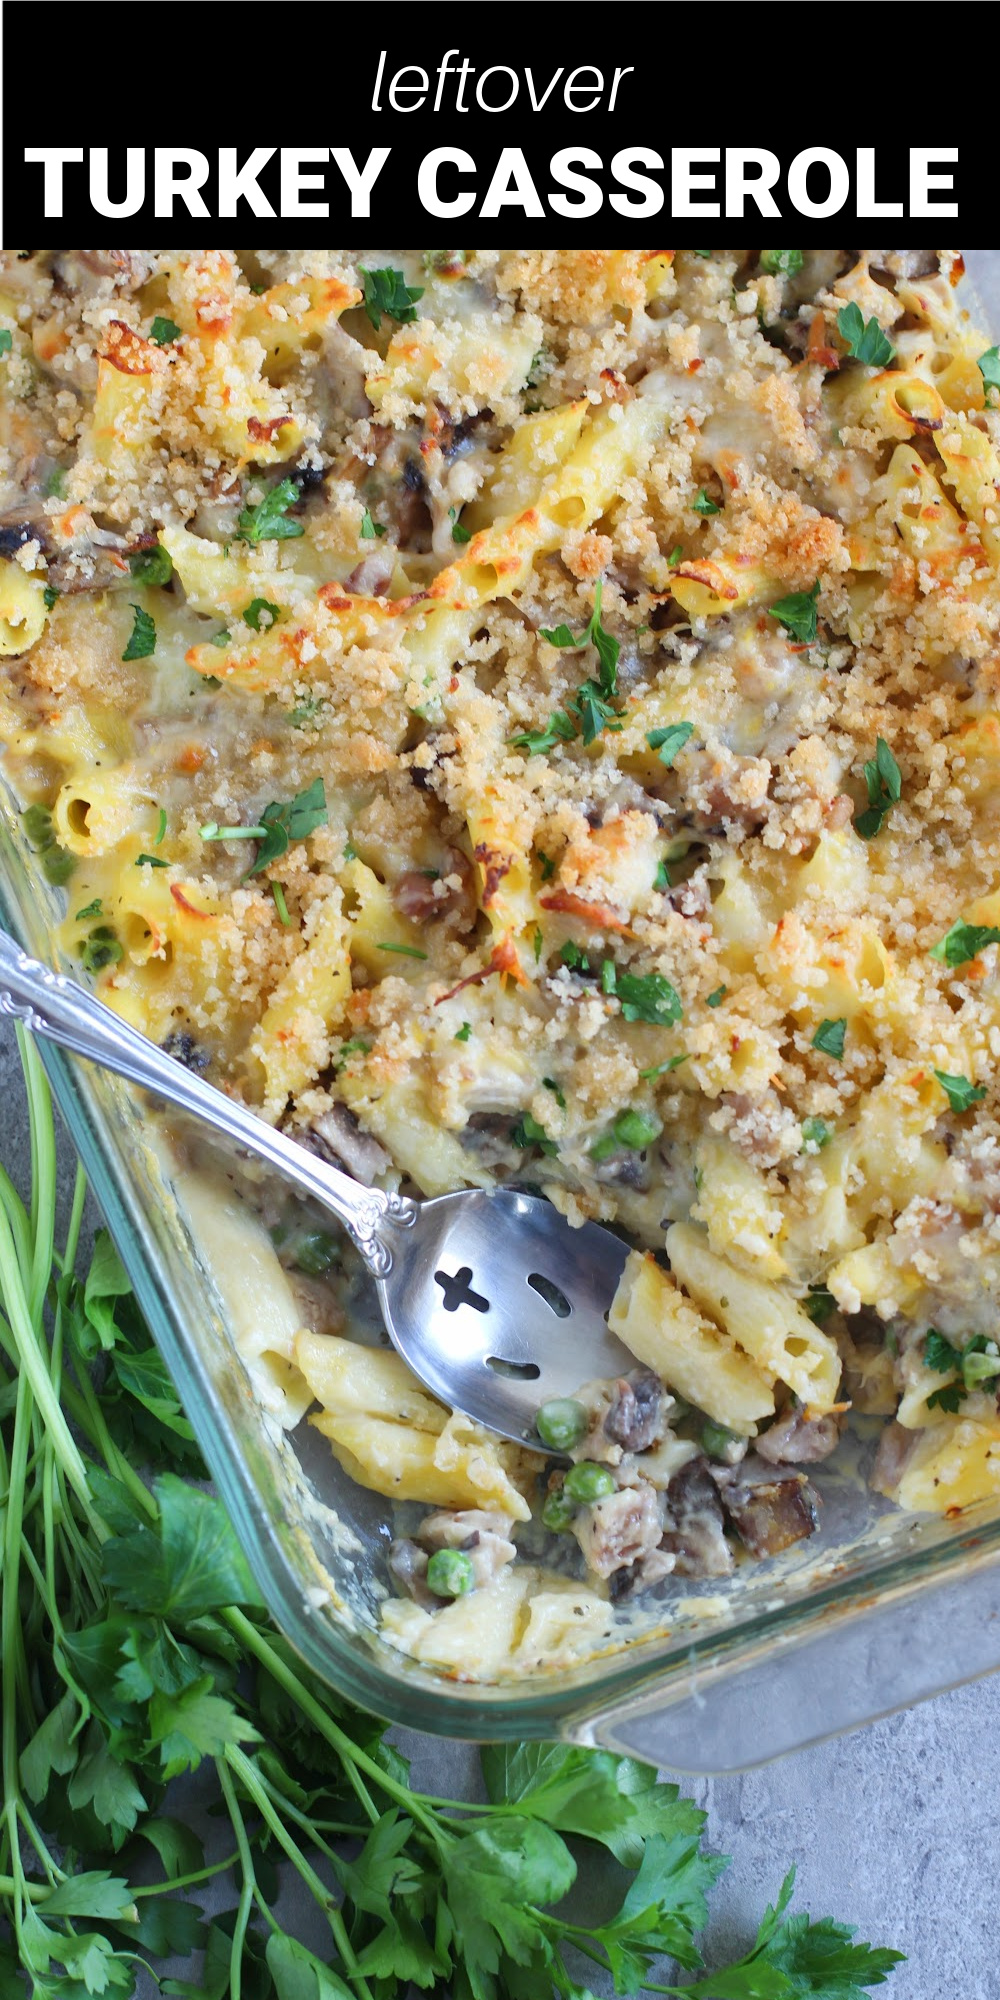 This recipe for warm and cheesy Leftover Turkey Casserole is made using leftover turkey and a few pantry staples to create a fast, easy and absolutely scrumptious dish the whole family will love.